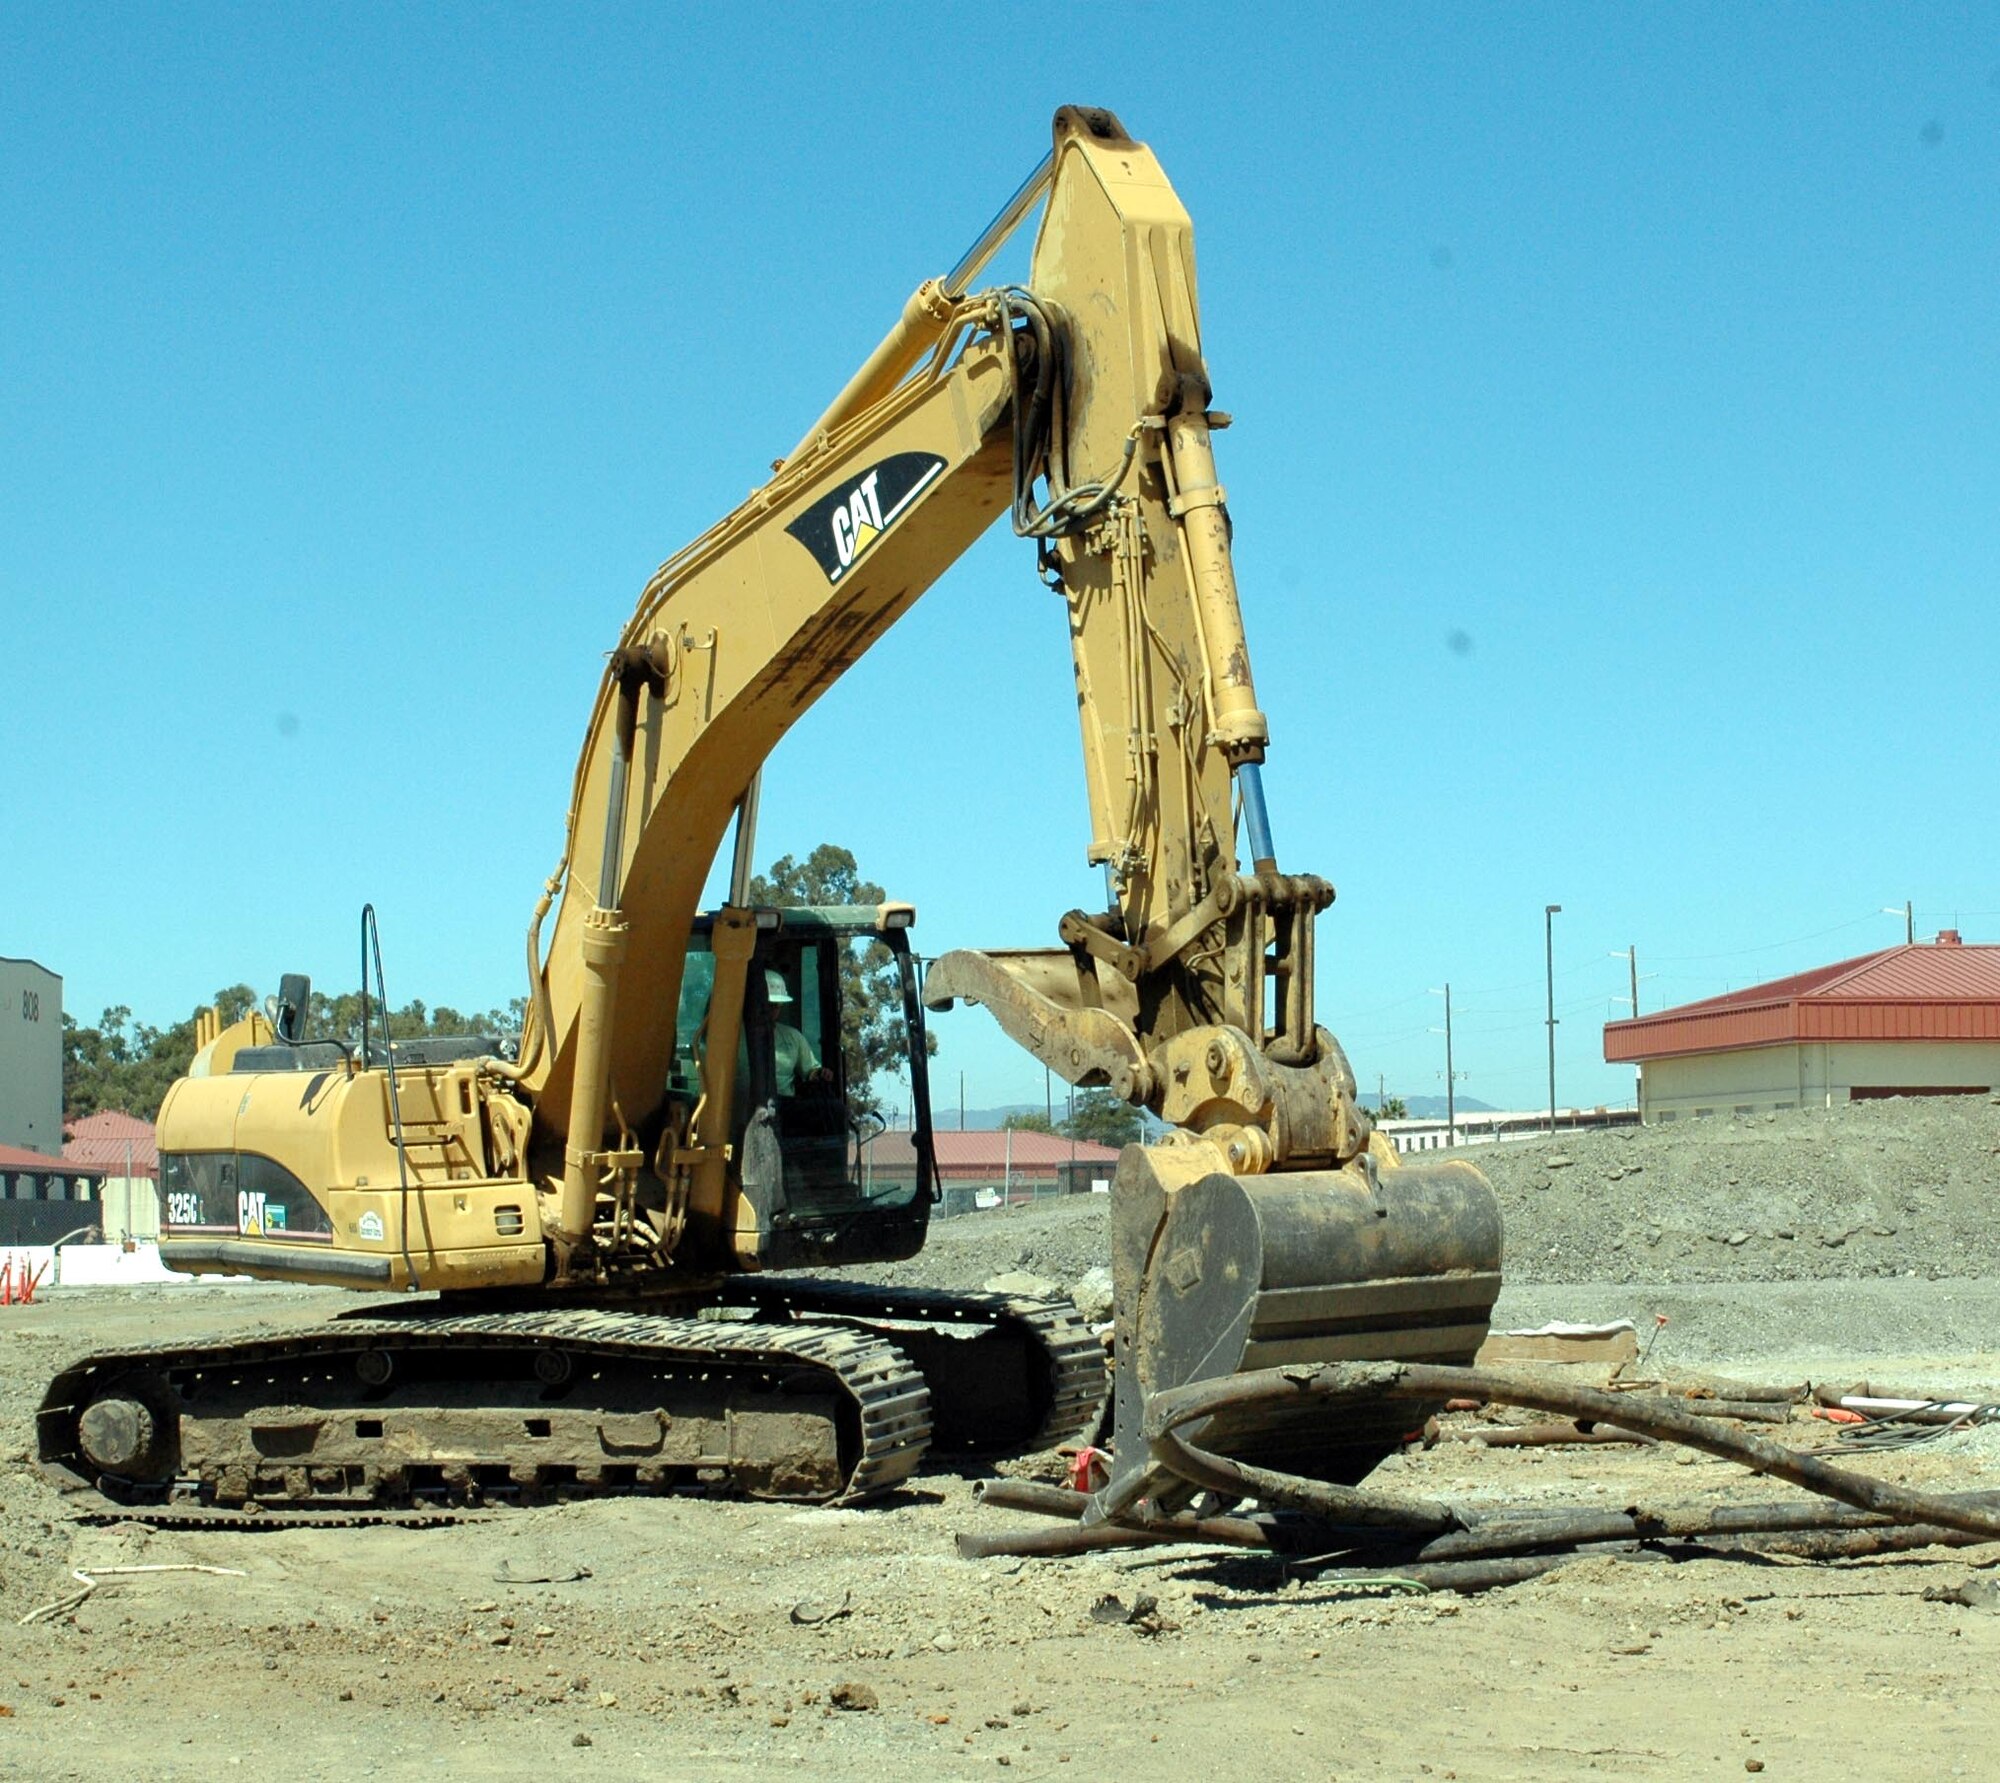 A worker operating a backhoe works to scoop up a piece of piping at the future site of the Aerospace Ground Equipment building. (U.S. Air Force photo/ Nick DeCicco)